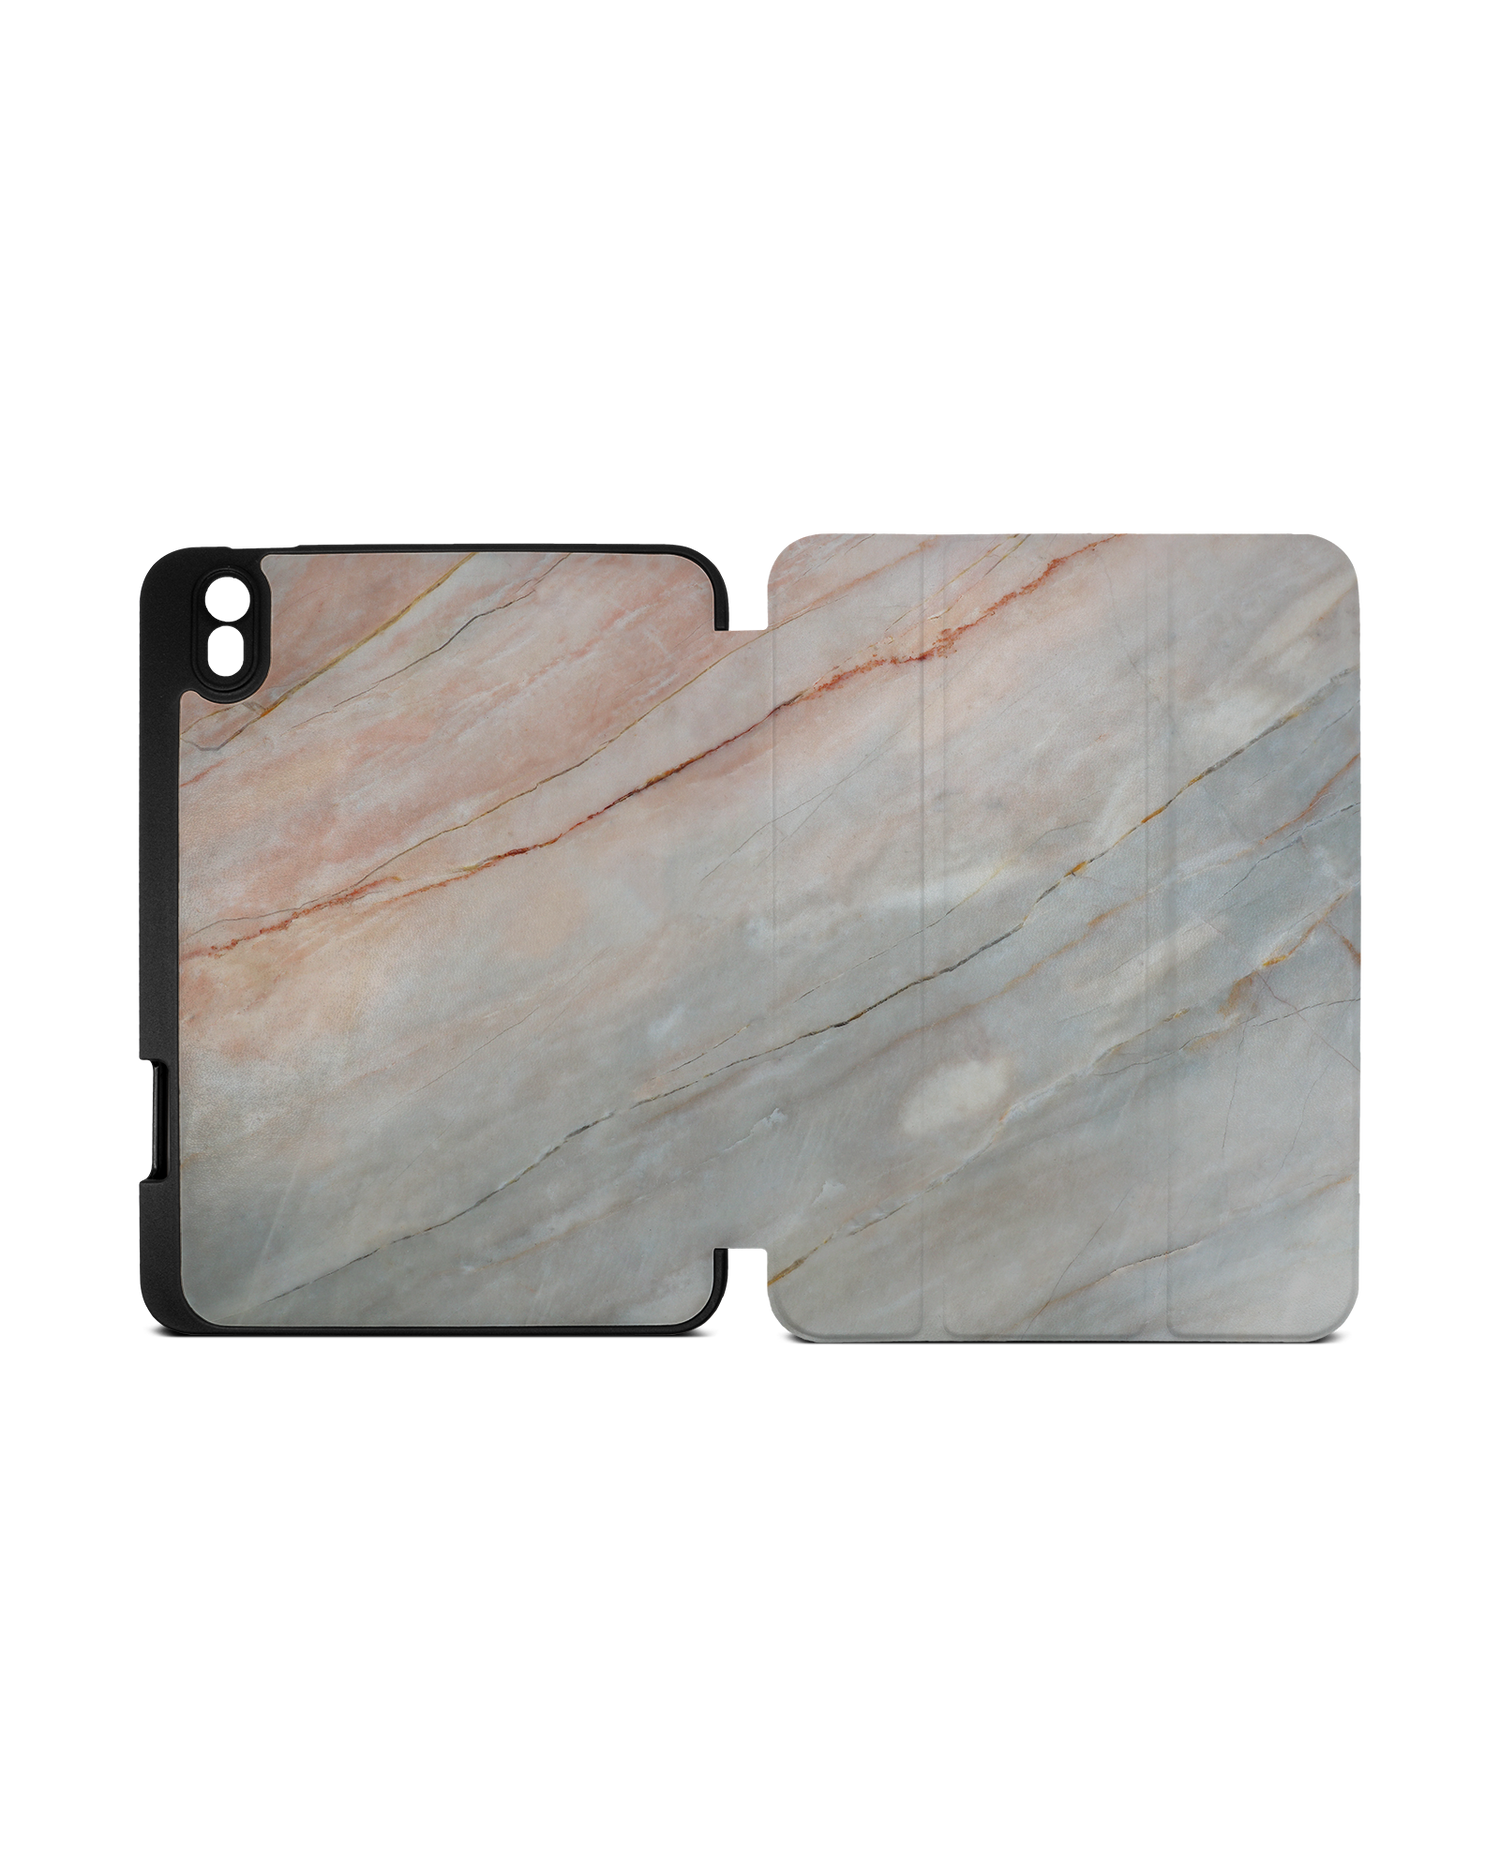 Mother of Pearl Marble iPad Case with Pencil Holder Apple iPad mini 6 (2021): Opened exterior view